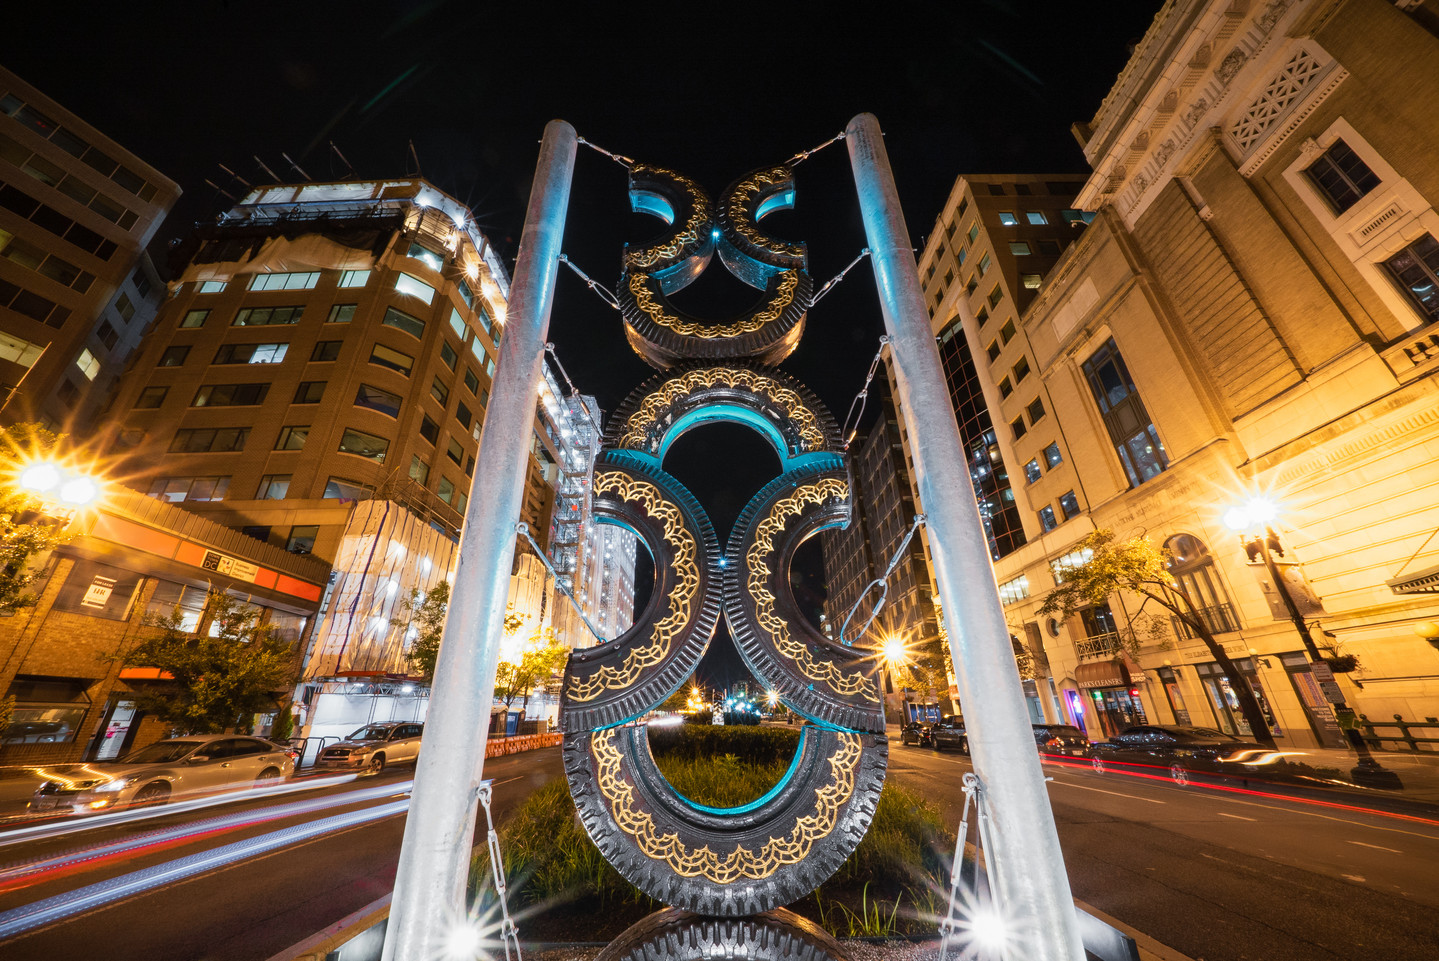 Night view of city street shows a large sculpture made of eight half-tires arranged into stacked hourglass shapes. Engravings, gold leaf, and green light on the interior of the tires decorate the structure. Light trails from cars frame the sculpture on both sides.